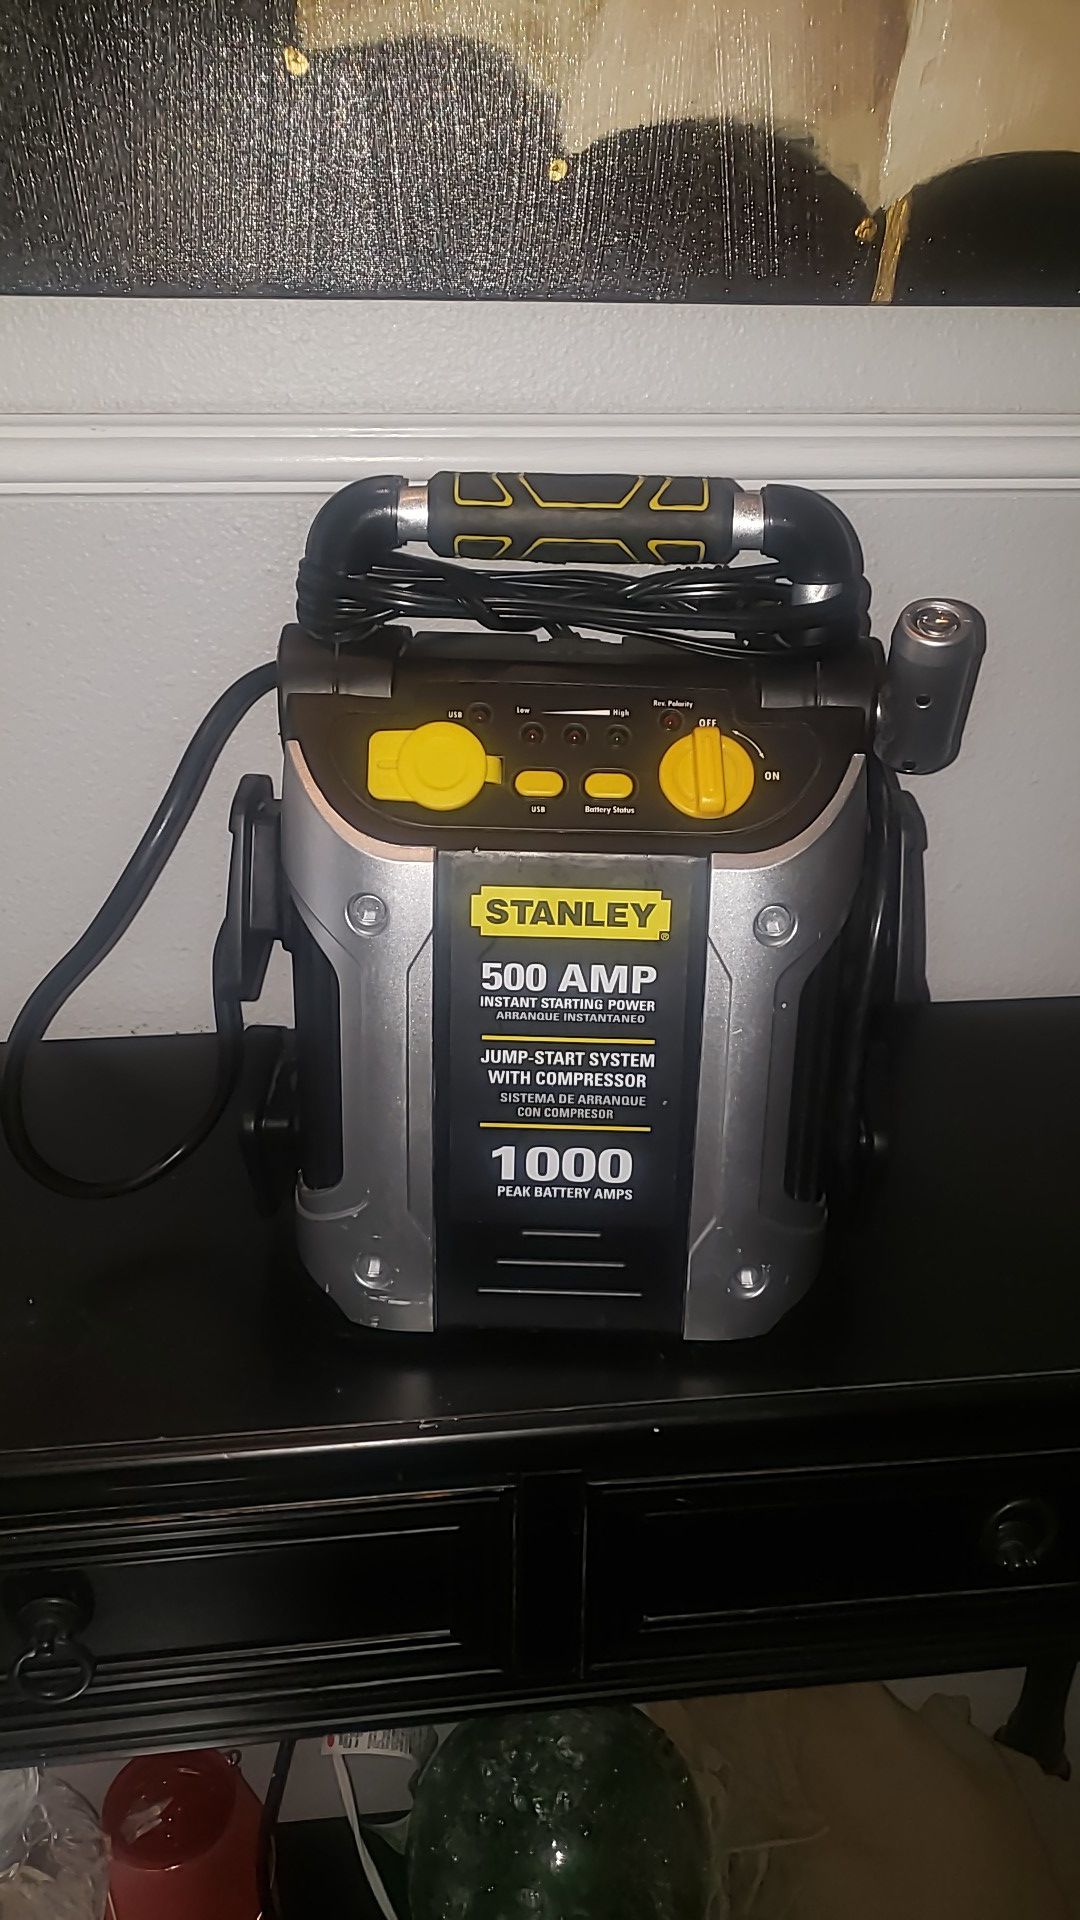 STANLEY 500 AMP JUNP START SYSTEM WITH COMPRESSOR AND USB PORTS FOR PHONE CHARGING